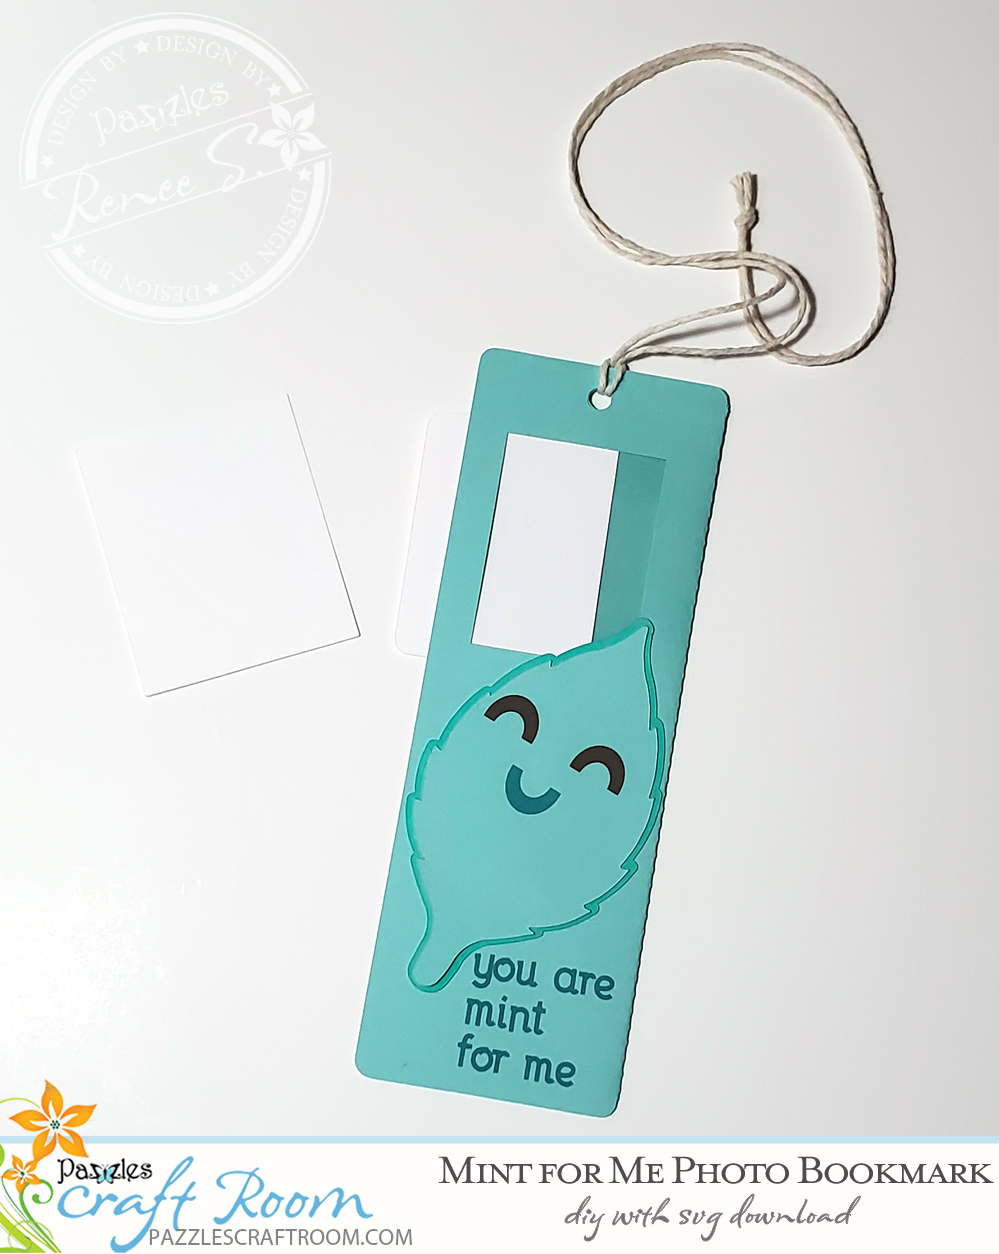 Pazzles DIY Mint for Me Photo Bookmark with instant SVG download. Instant SVG download compatible with all major electronic cutters including Pazzles Inspiration, Cricut, and Silhouette Cameo. Design by Renee Smart.